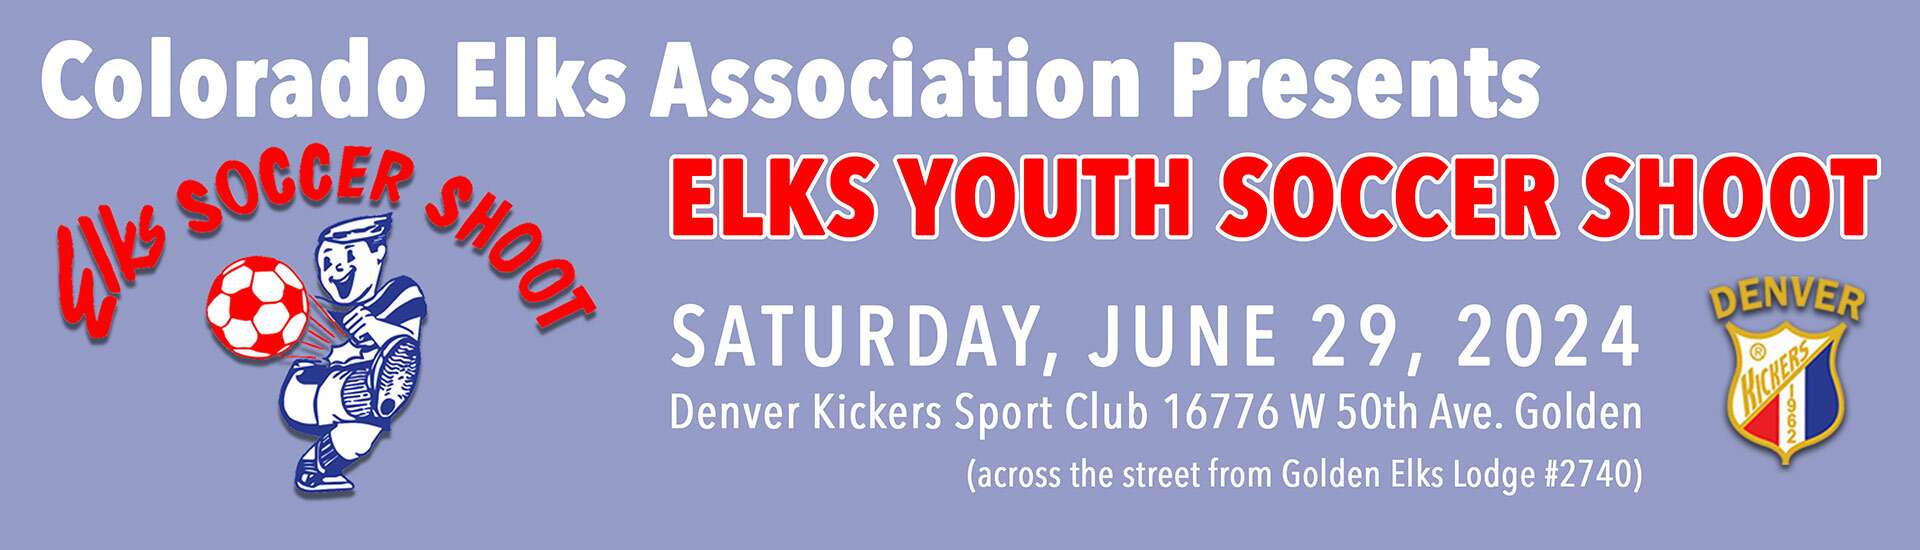 Elks Youth Soccer Shoot, Saturday June 29. Click for more info